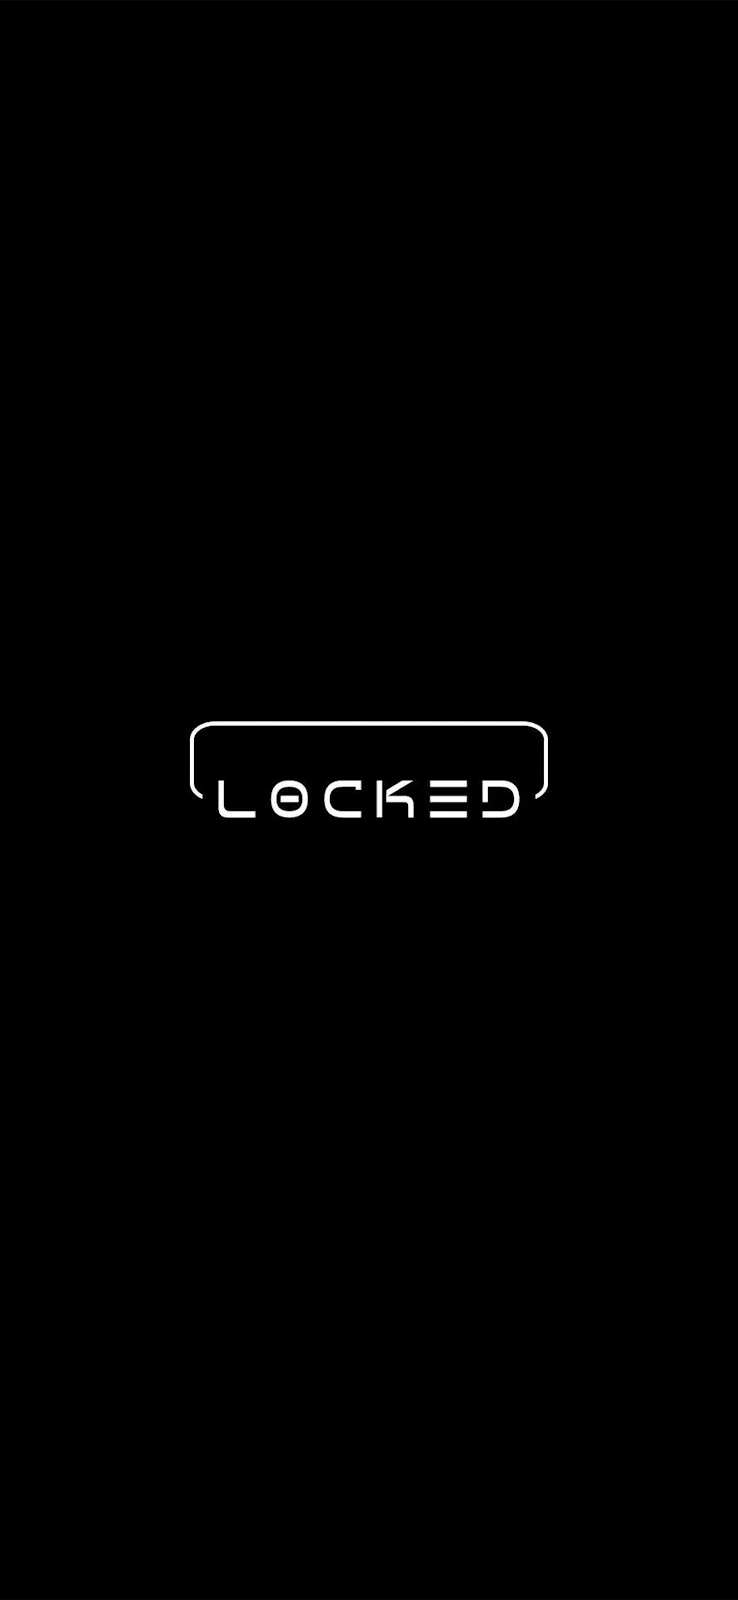 A Cool Locked, Black 4K iPhone Wallpaper for Free Download in High Quality [2160x4680]